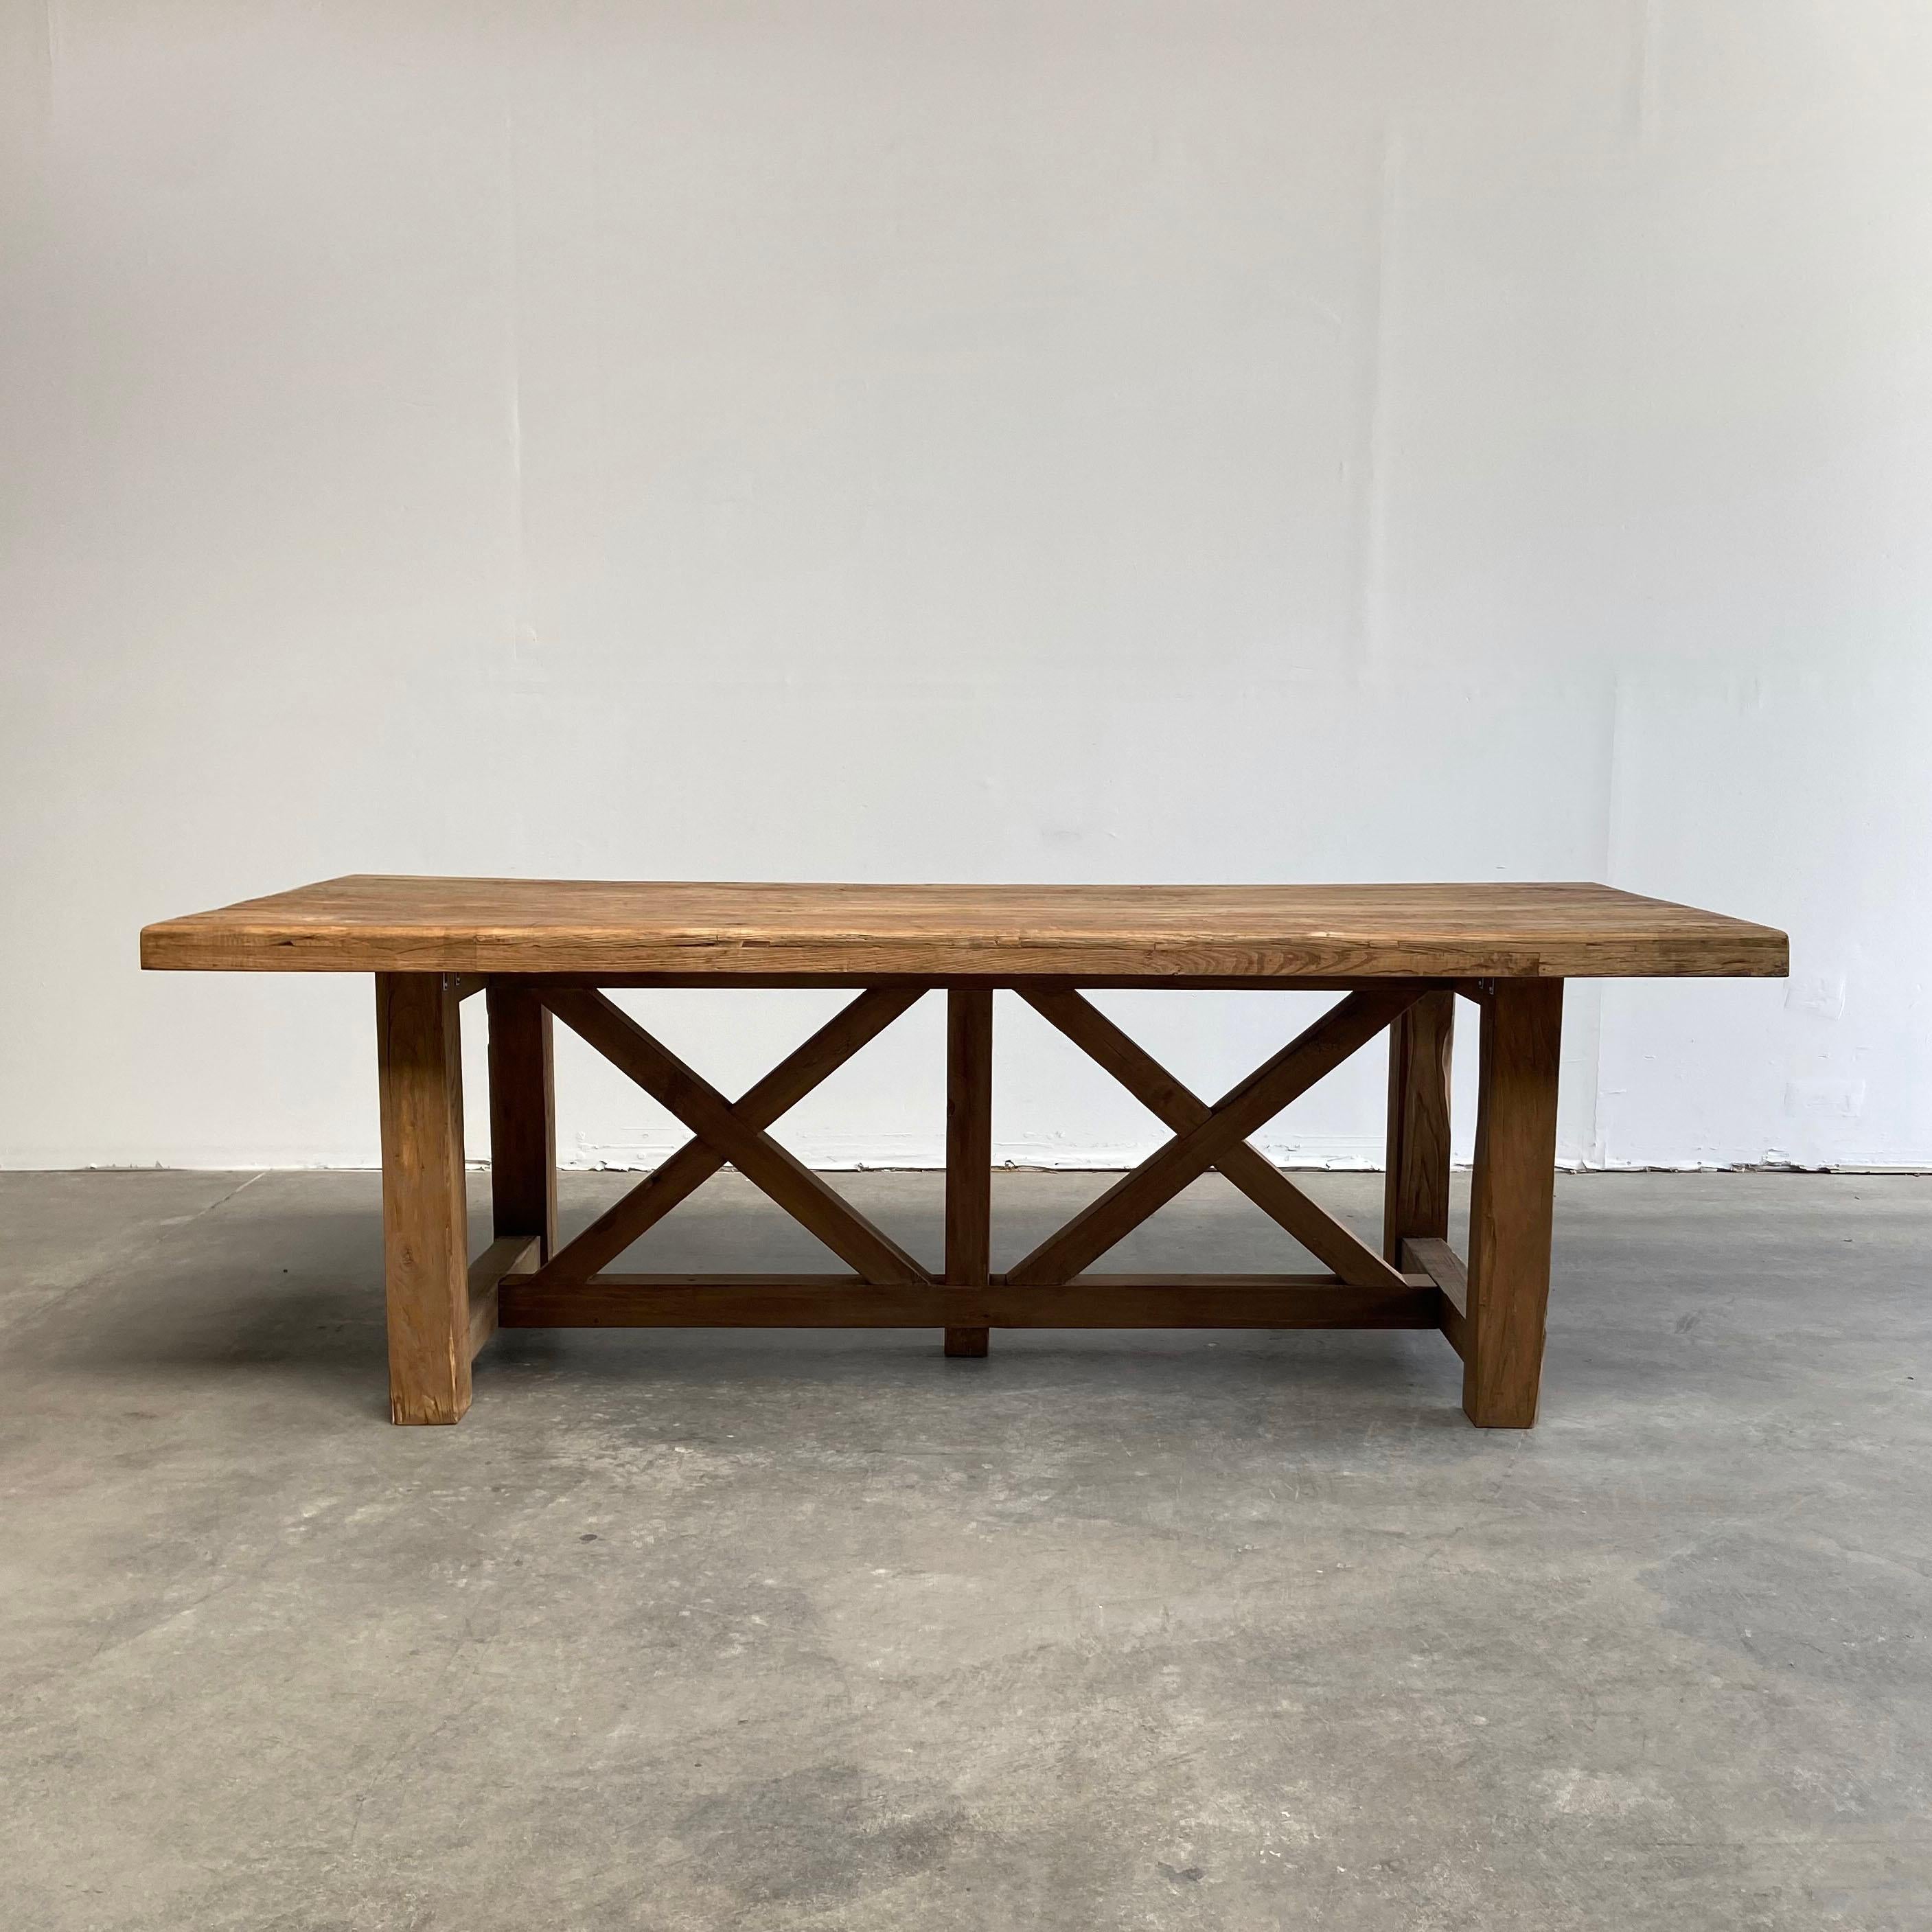 Vintage reclaimed elm wood dining table. Beautiful antique patina, with weathering and age, these are solid and sturdy ready for daily use, great for any space. Each piece is truly unique and one of a kind with different characteristics in the